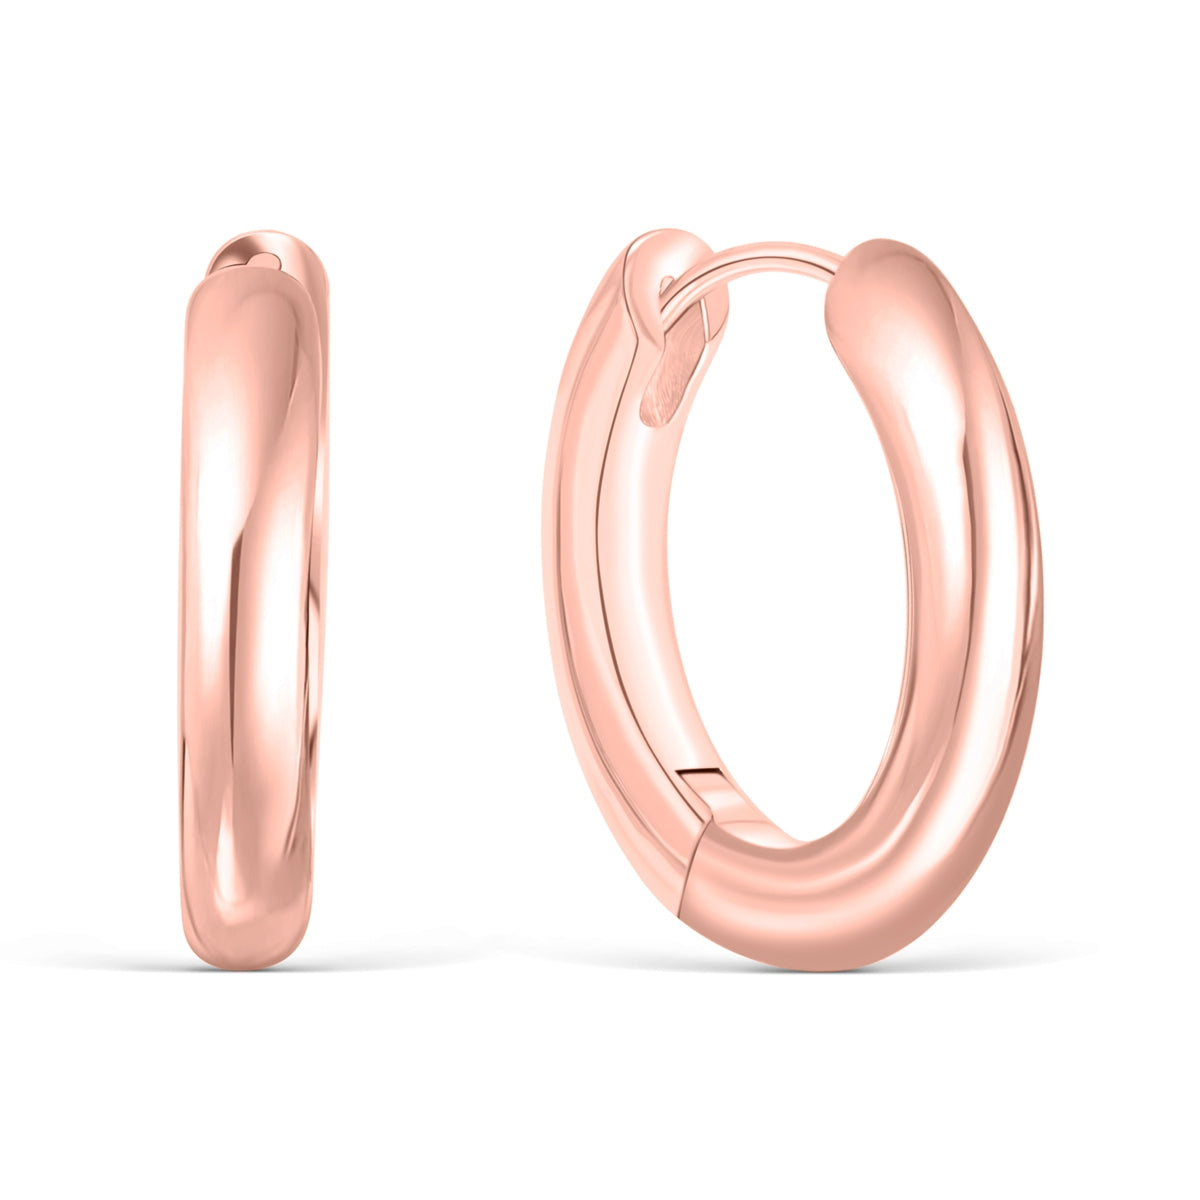 Thick rose gold plated hoop earrings